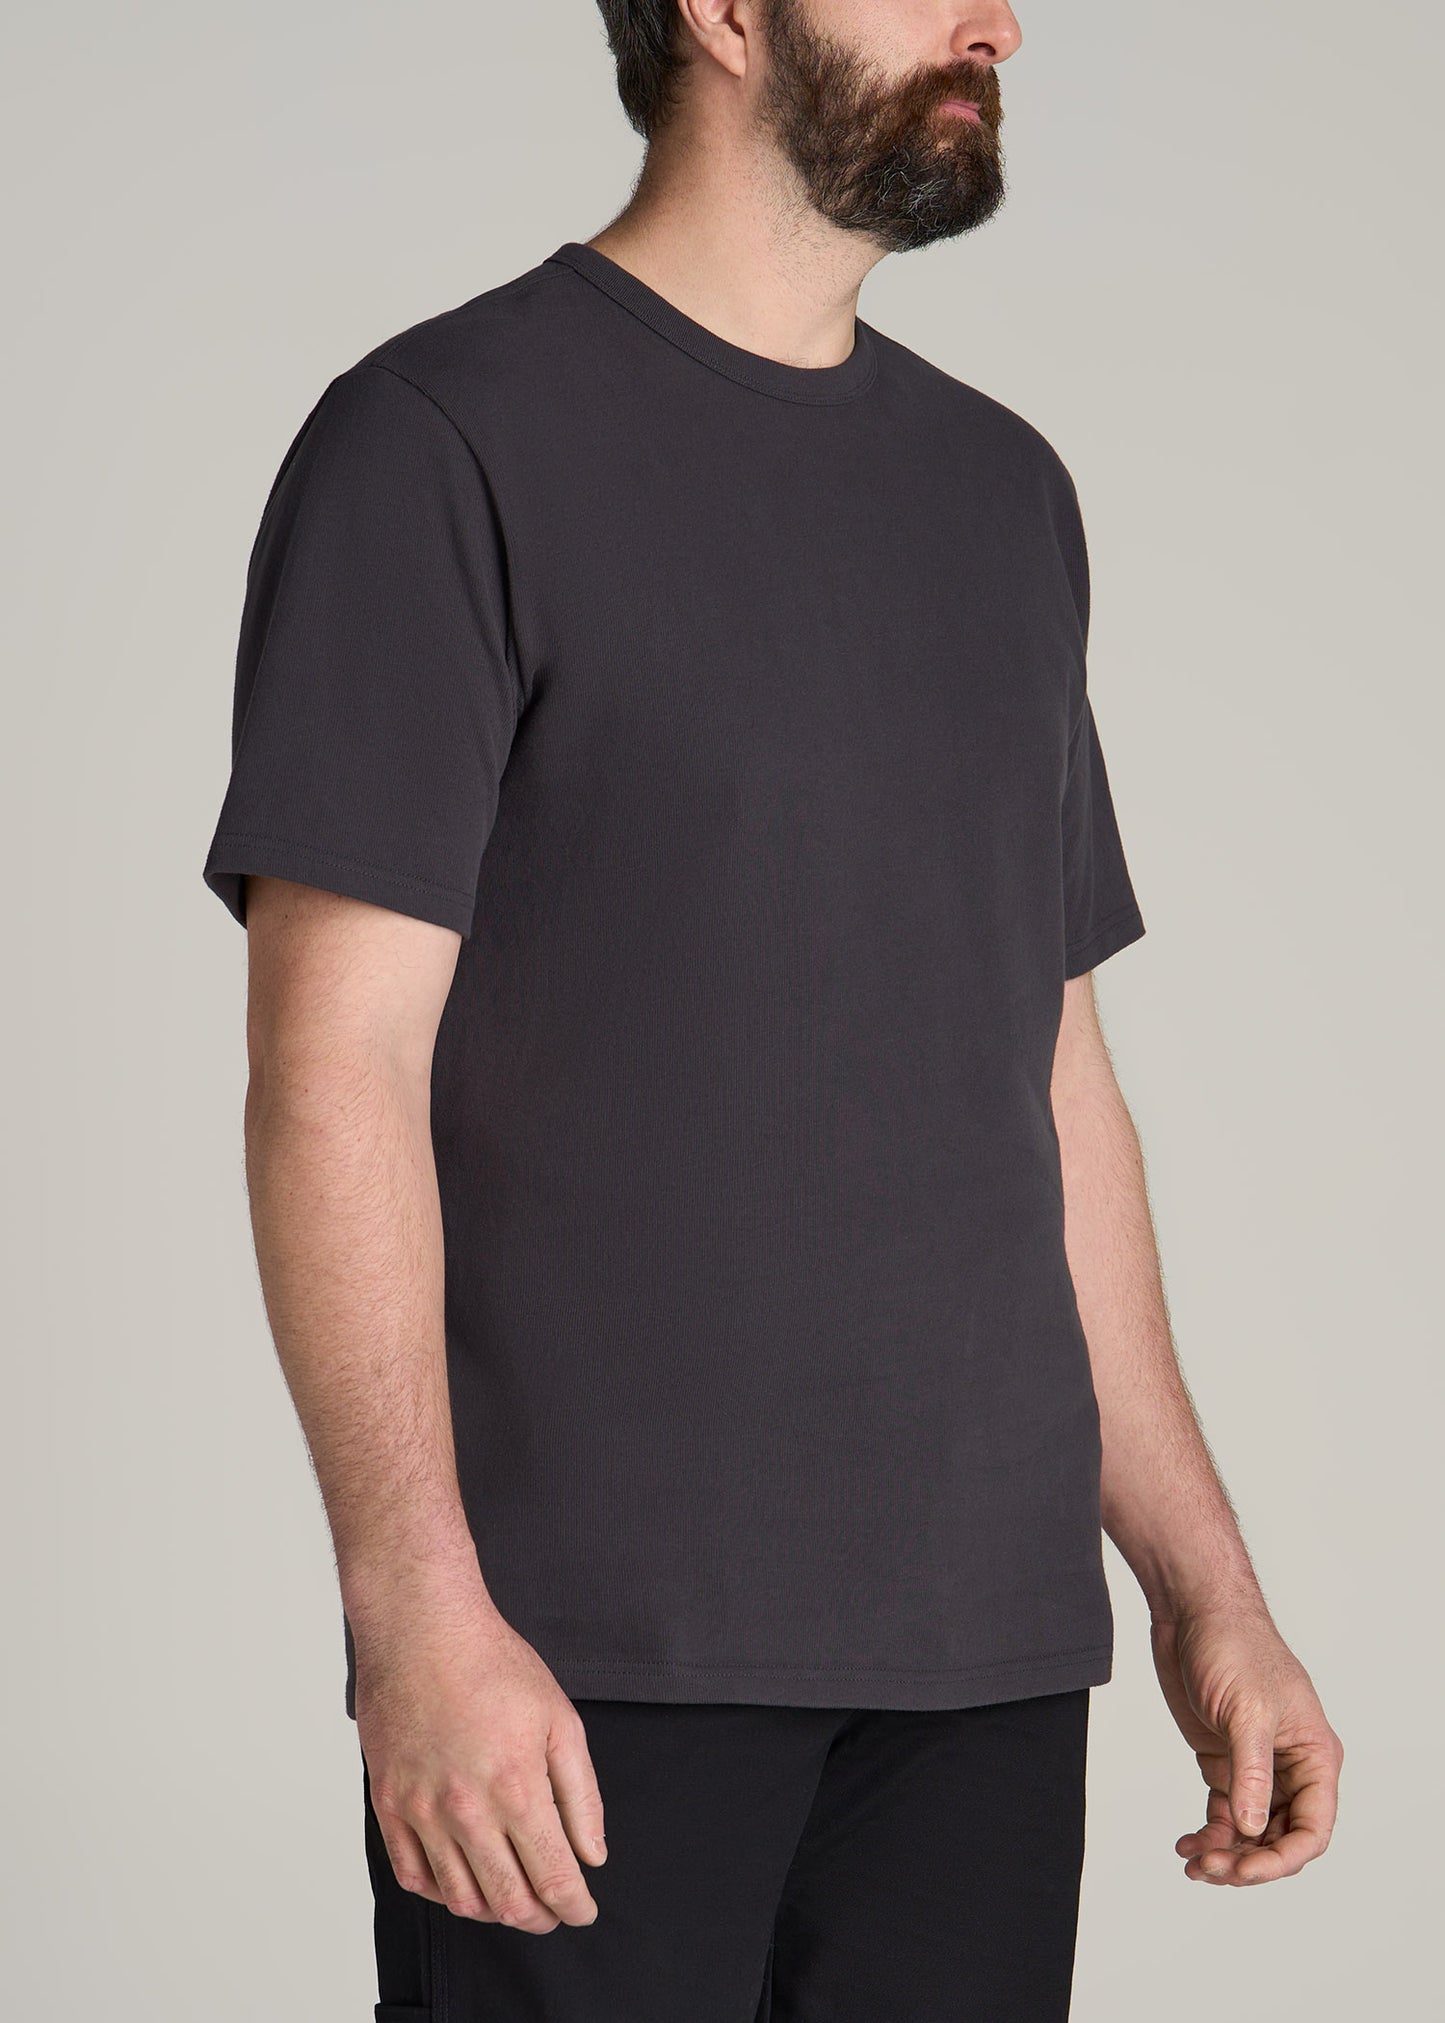 LJ&S Heavyweight RELAXED-FIT Tall Tee in Vintage Gunmetal Grey